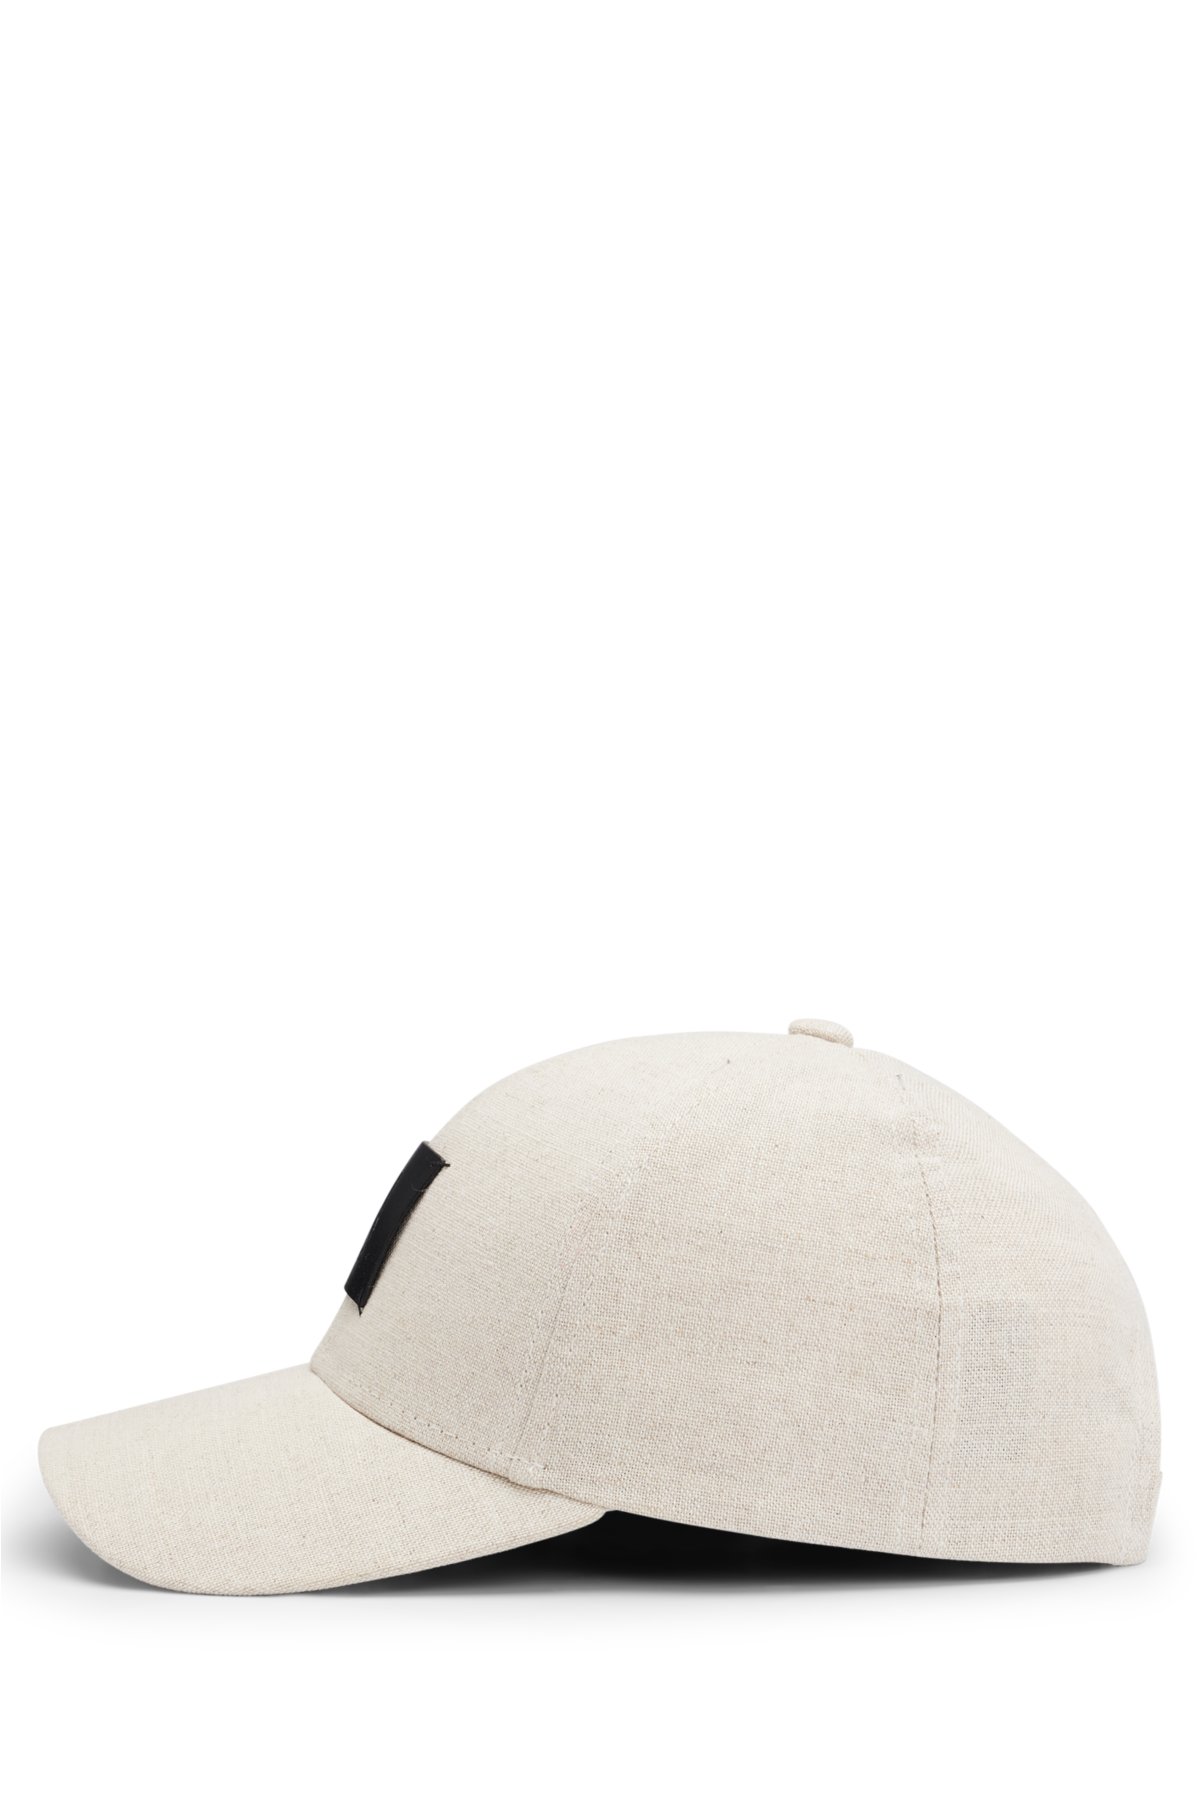 NAOMI x BOSS cap in cotton with logo patch, Natural